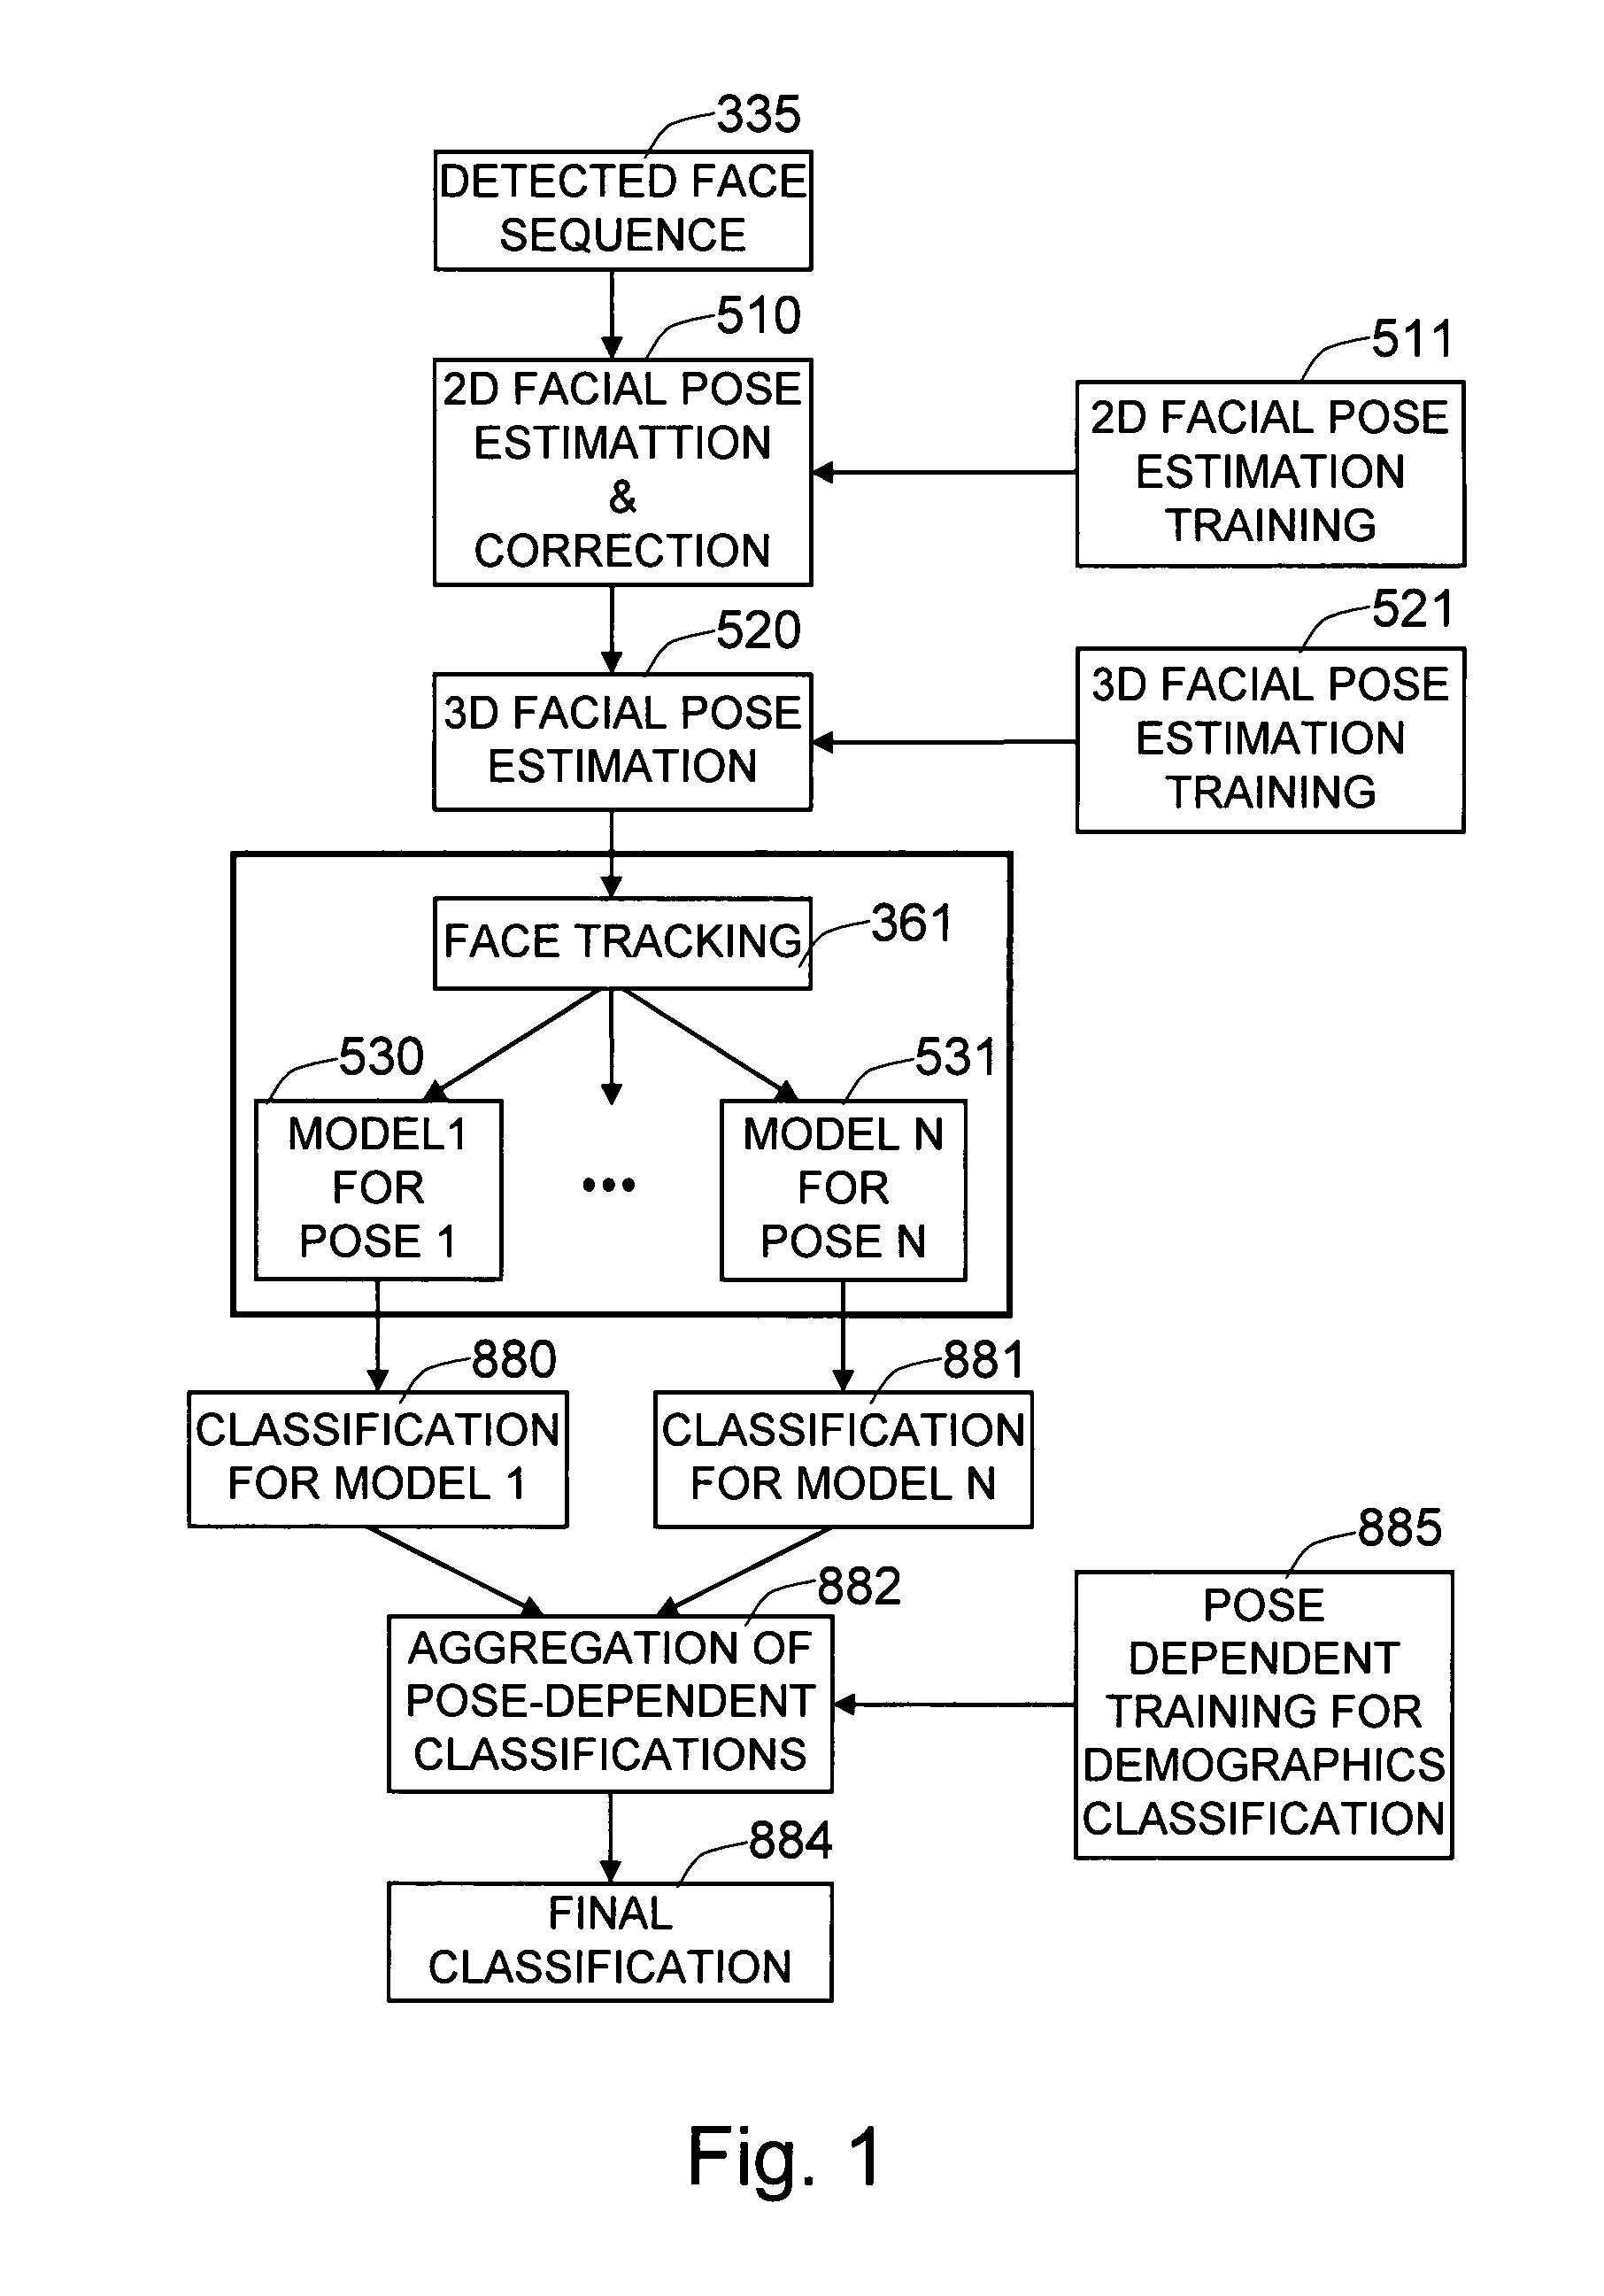 Method and system for robust demographic classification using pose independent model from sequence of face images